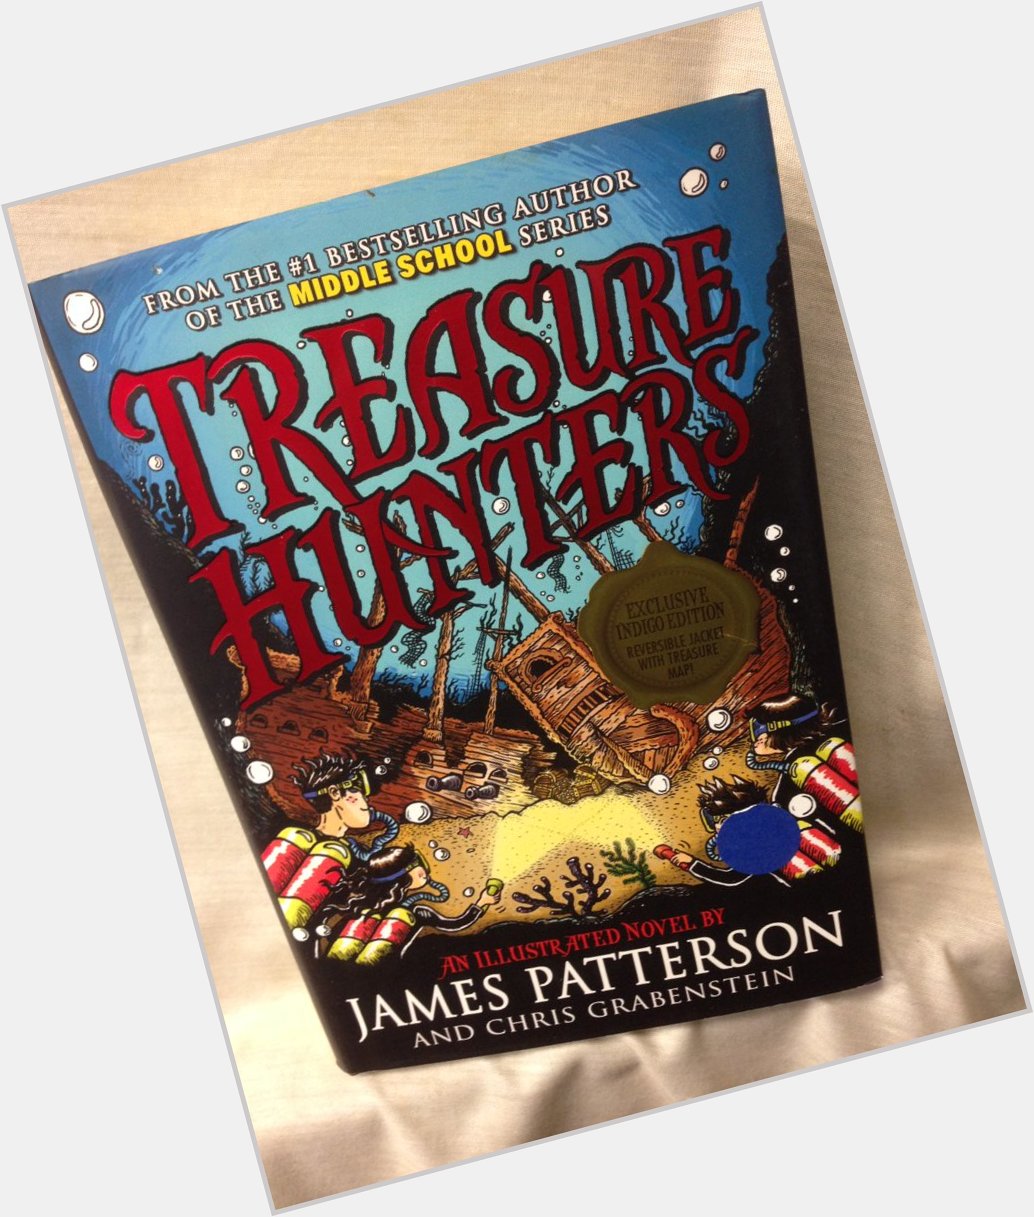 Happy Birthday James Patterson! His Treasure Hunter series is action-packed and entertaining! 